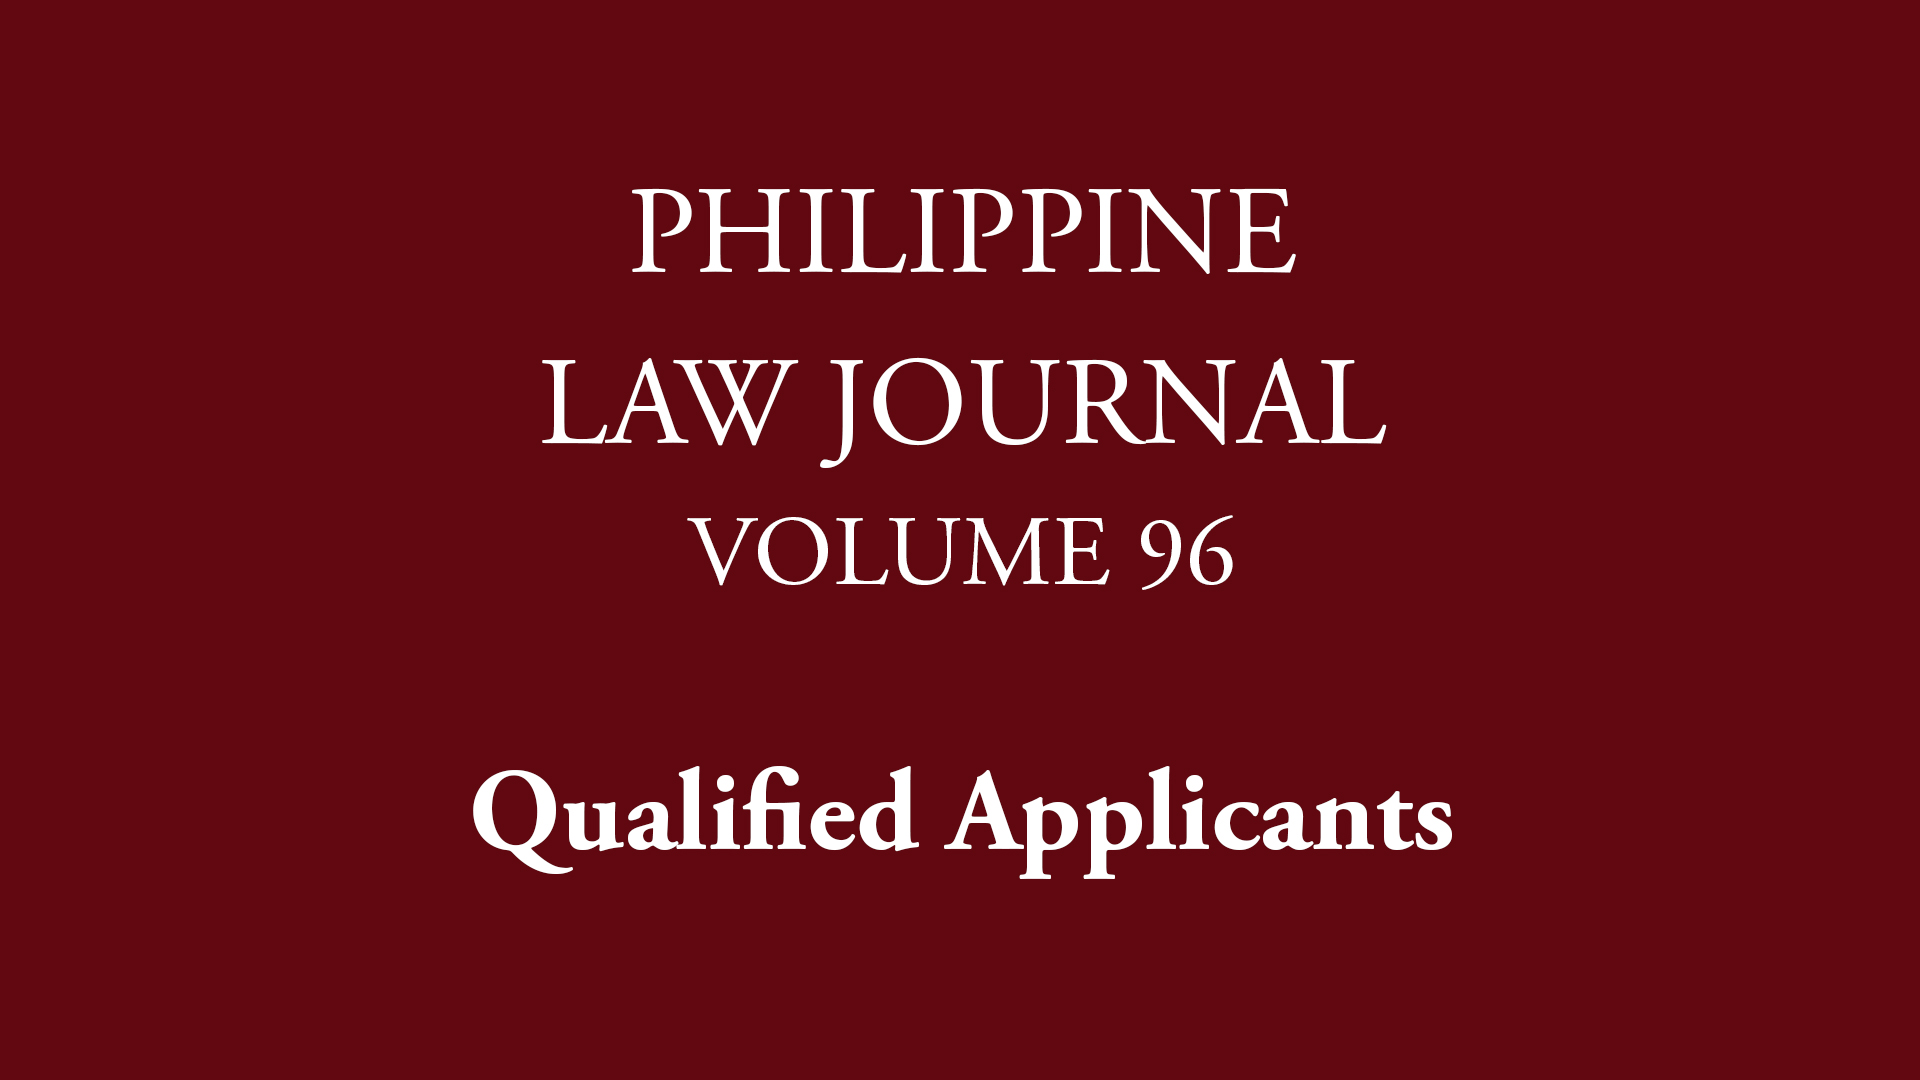 Applicants Qualified to take the PLJ 96 Student Editorial Board Exam